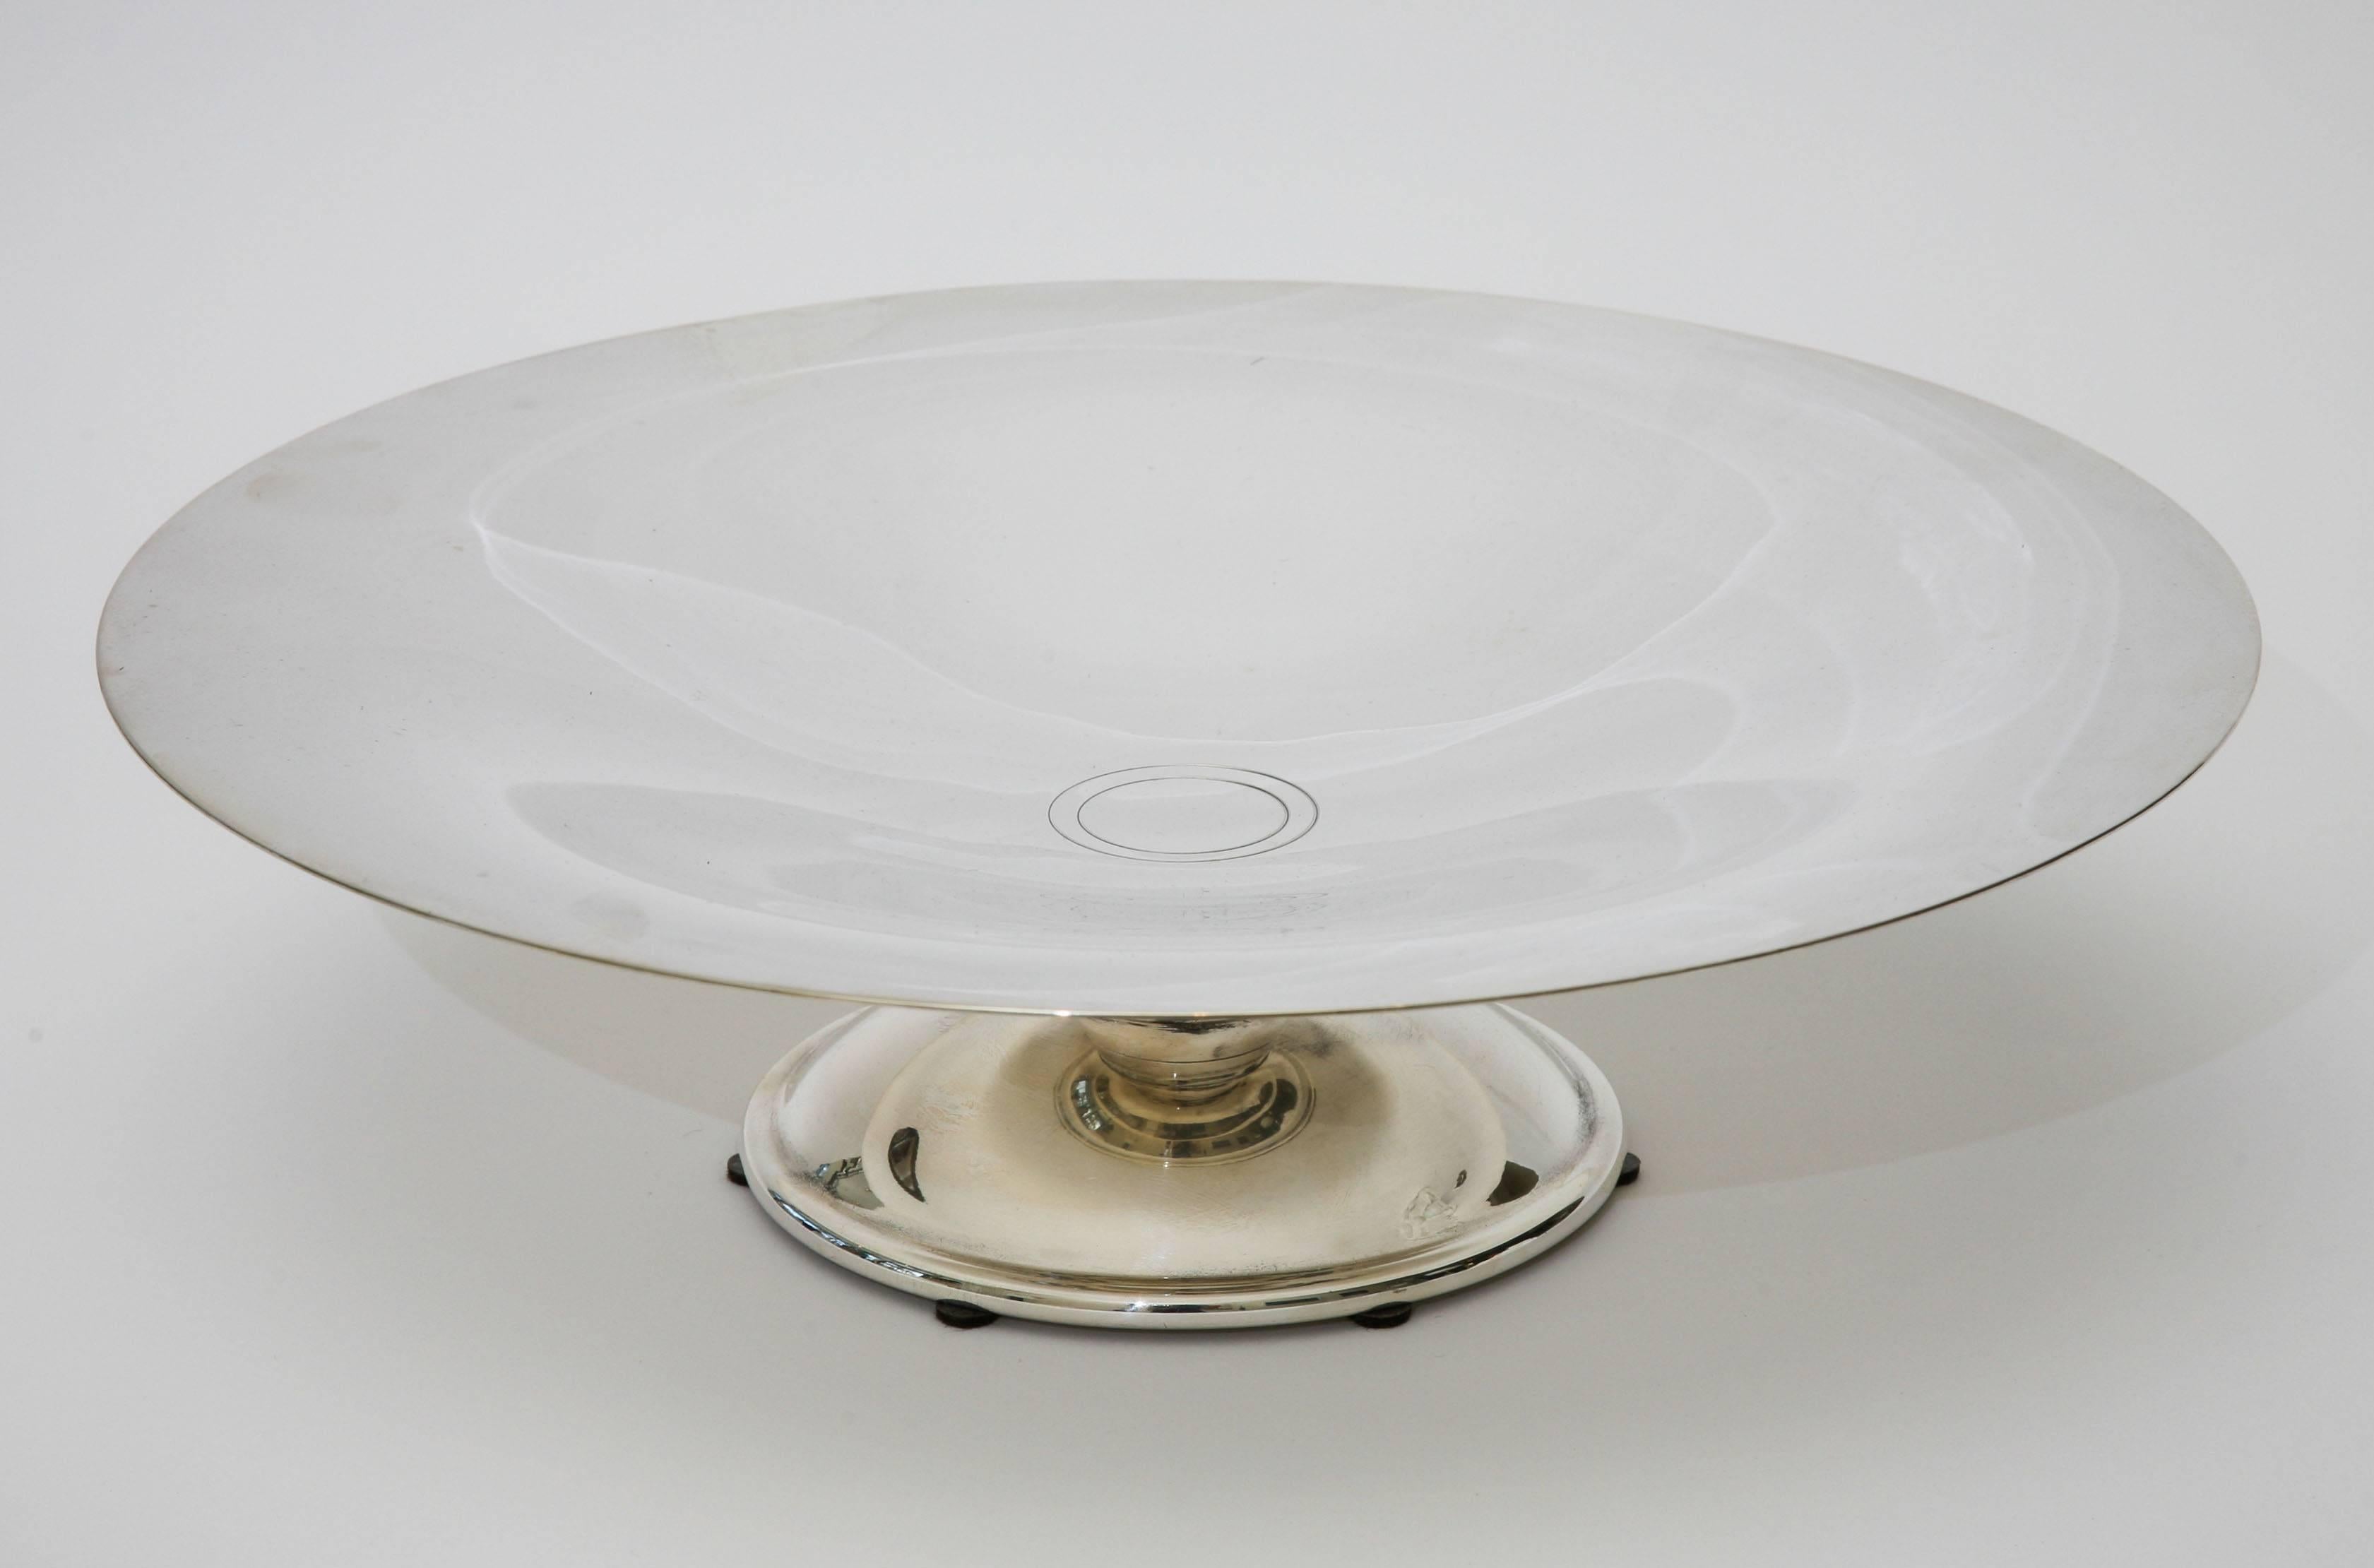 This timeless and classic French hallmarked polished silver plate pedestal bowl is a great centerpiece and or serving bowl. There are two concentric circles in the center.
The brown half circles at the bottom are felt pads. It is hallmarked